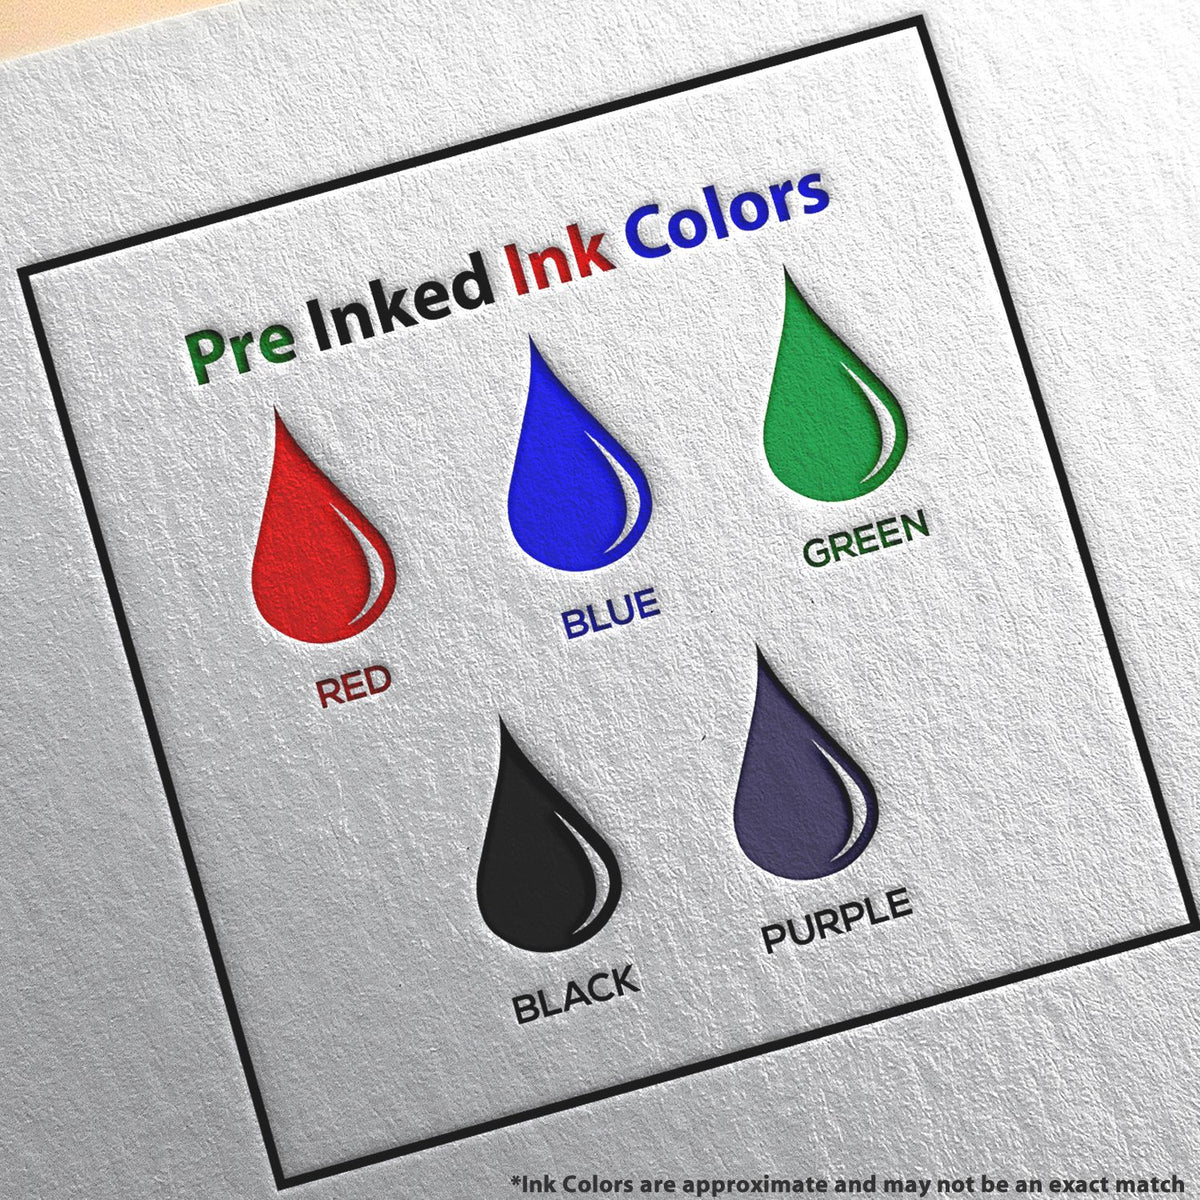 A picture showing the different ink colors or hues available for the Slim Pre-Inked Delaware Professional Engineer Seal Stamp product.